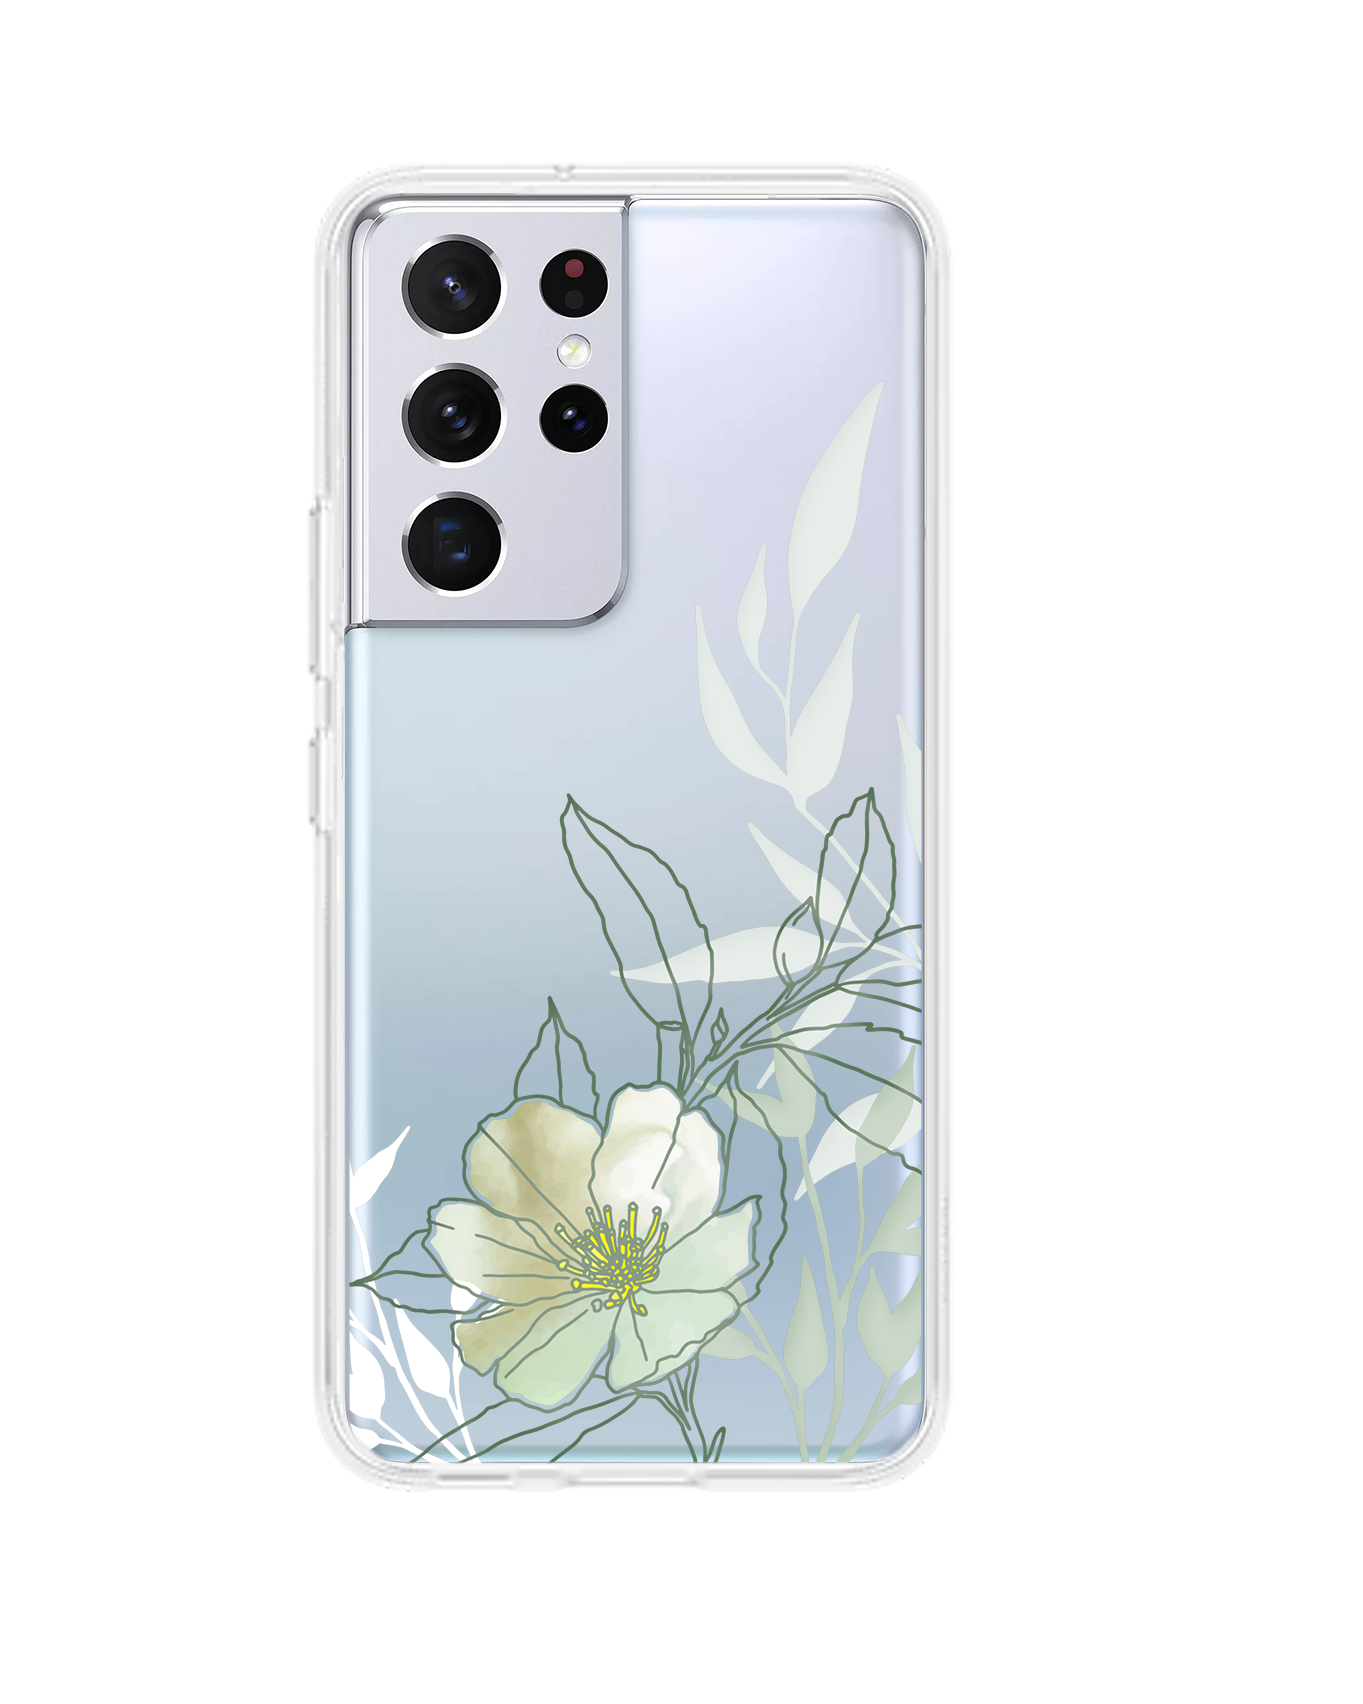 Android Rearguard Hybrid Case - Greenmint Lily